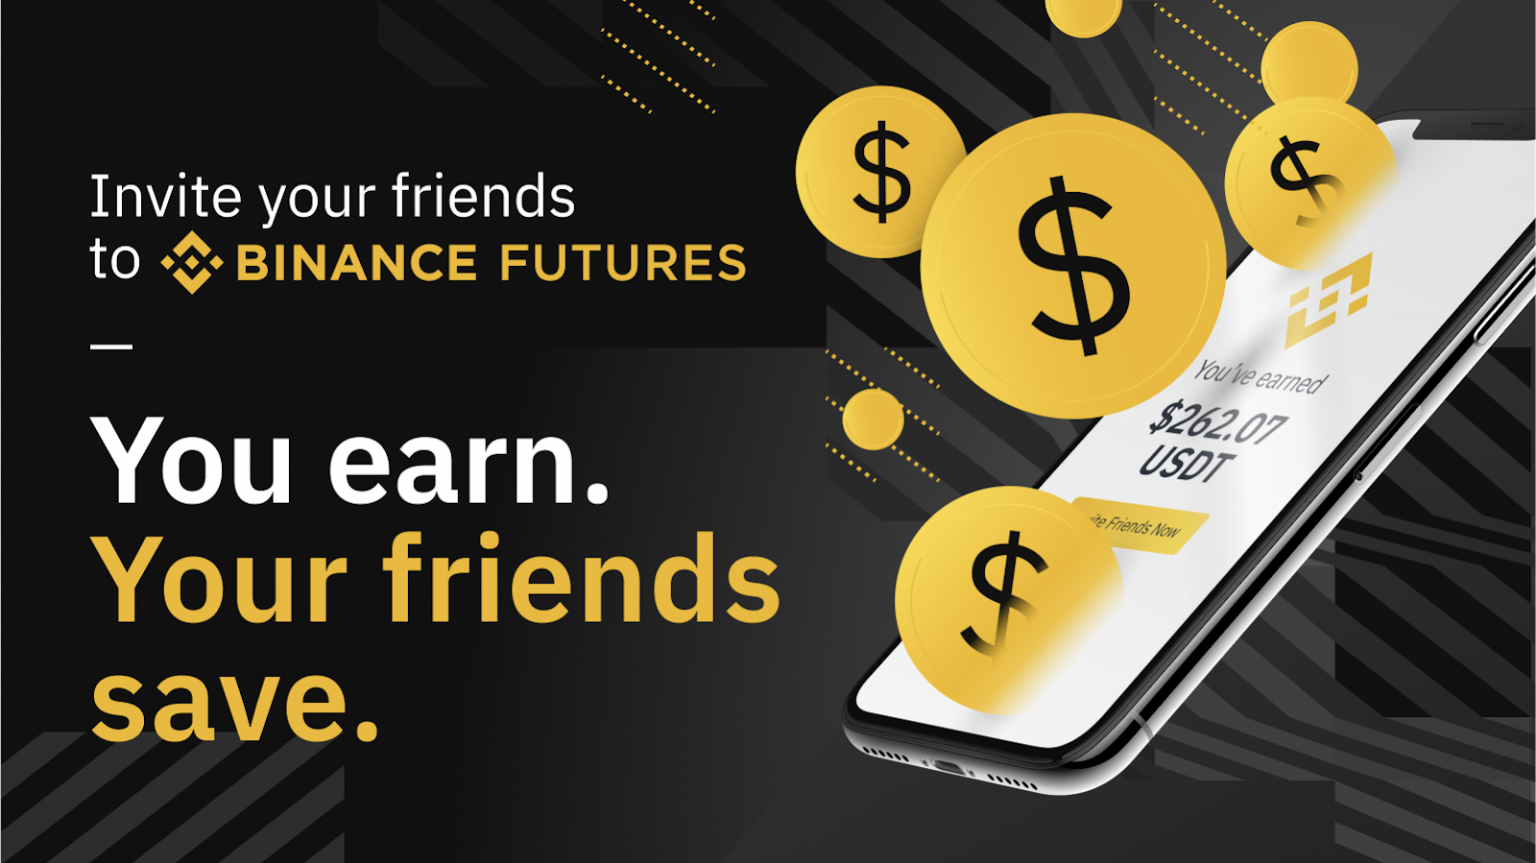 Binance Futures Referral Code:10OFFER ,10% Discount Code